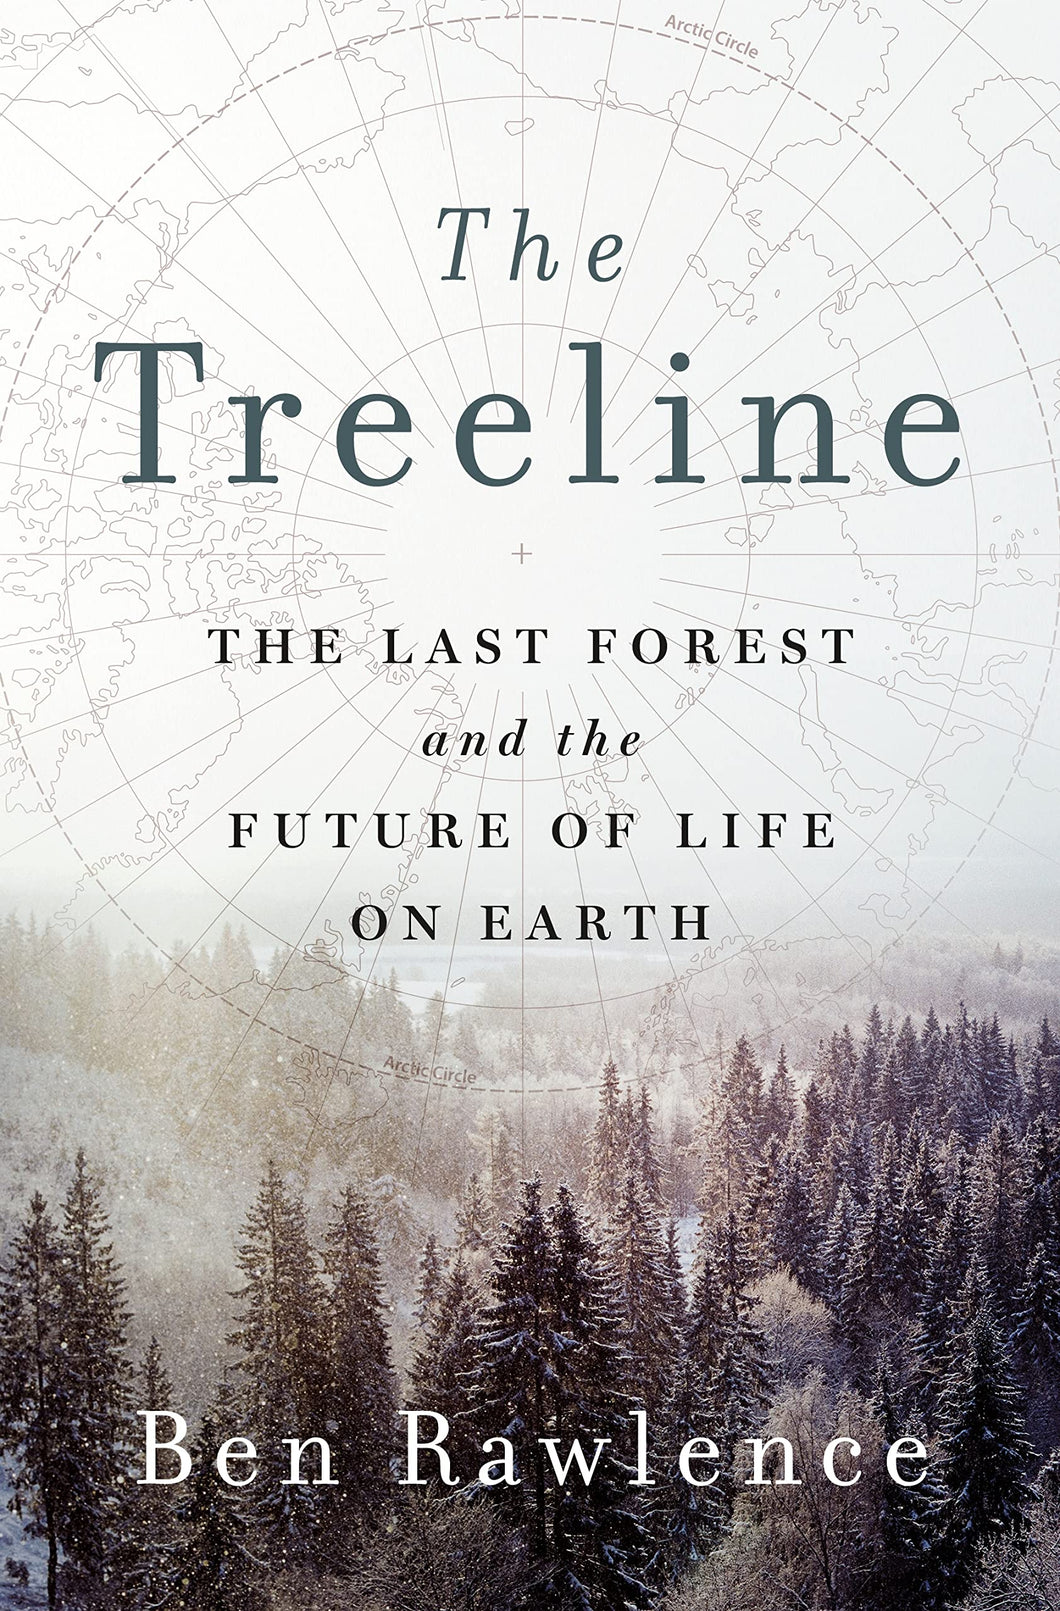 The Treeline: The Last Forest and the Future of Life on Earth [Ben Rawlence]